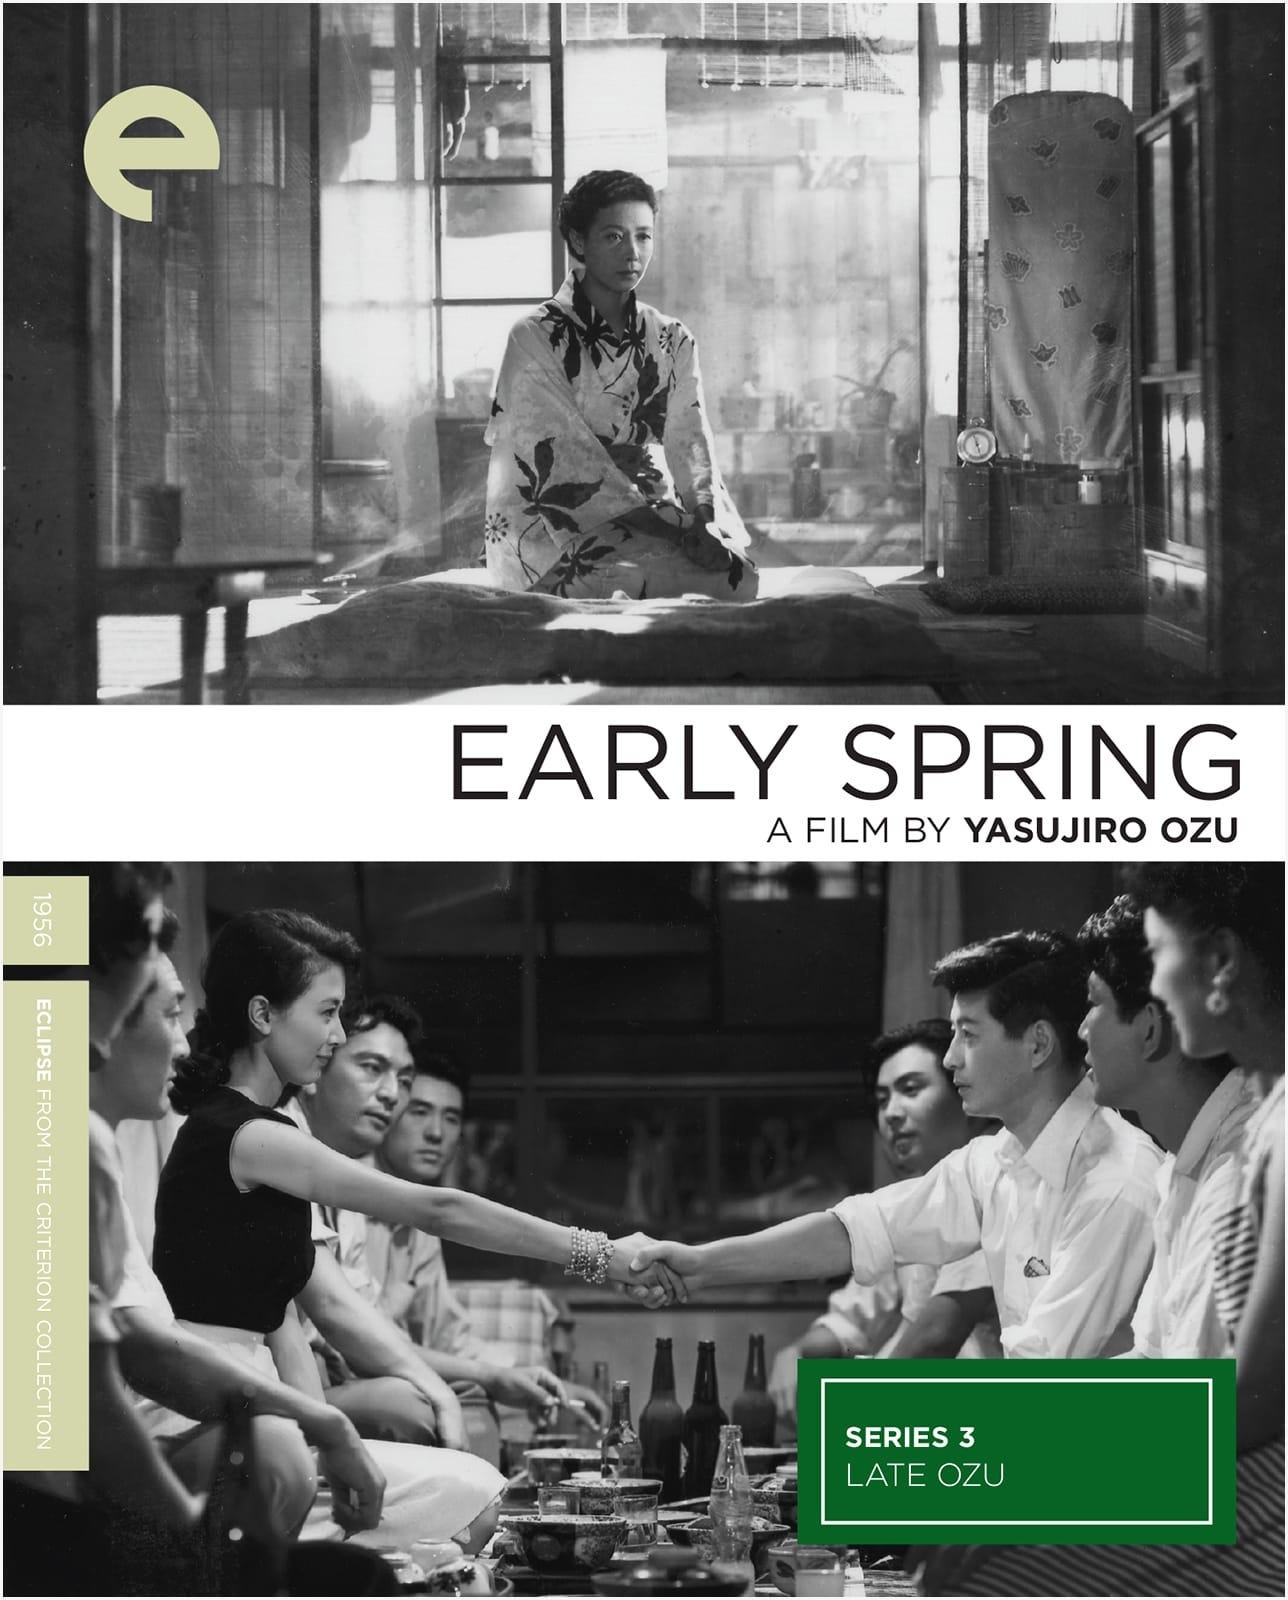 Early Spring (1956) | The Criterion Collection